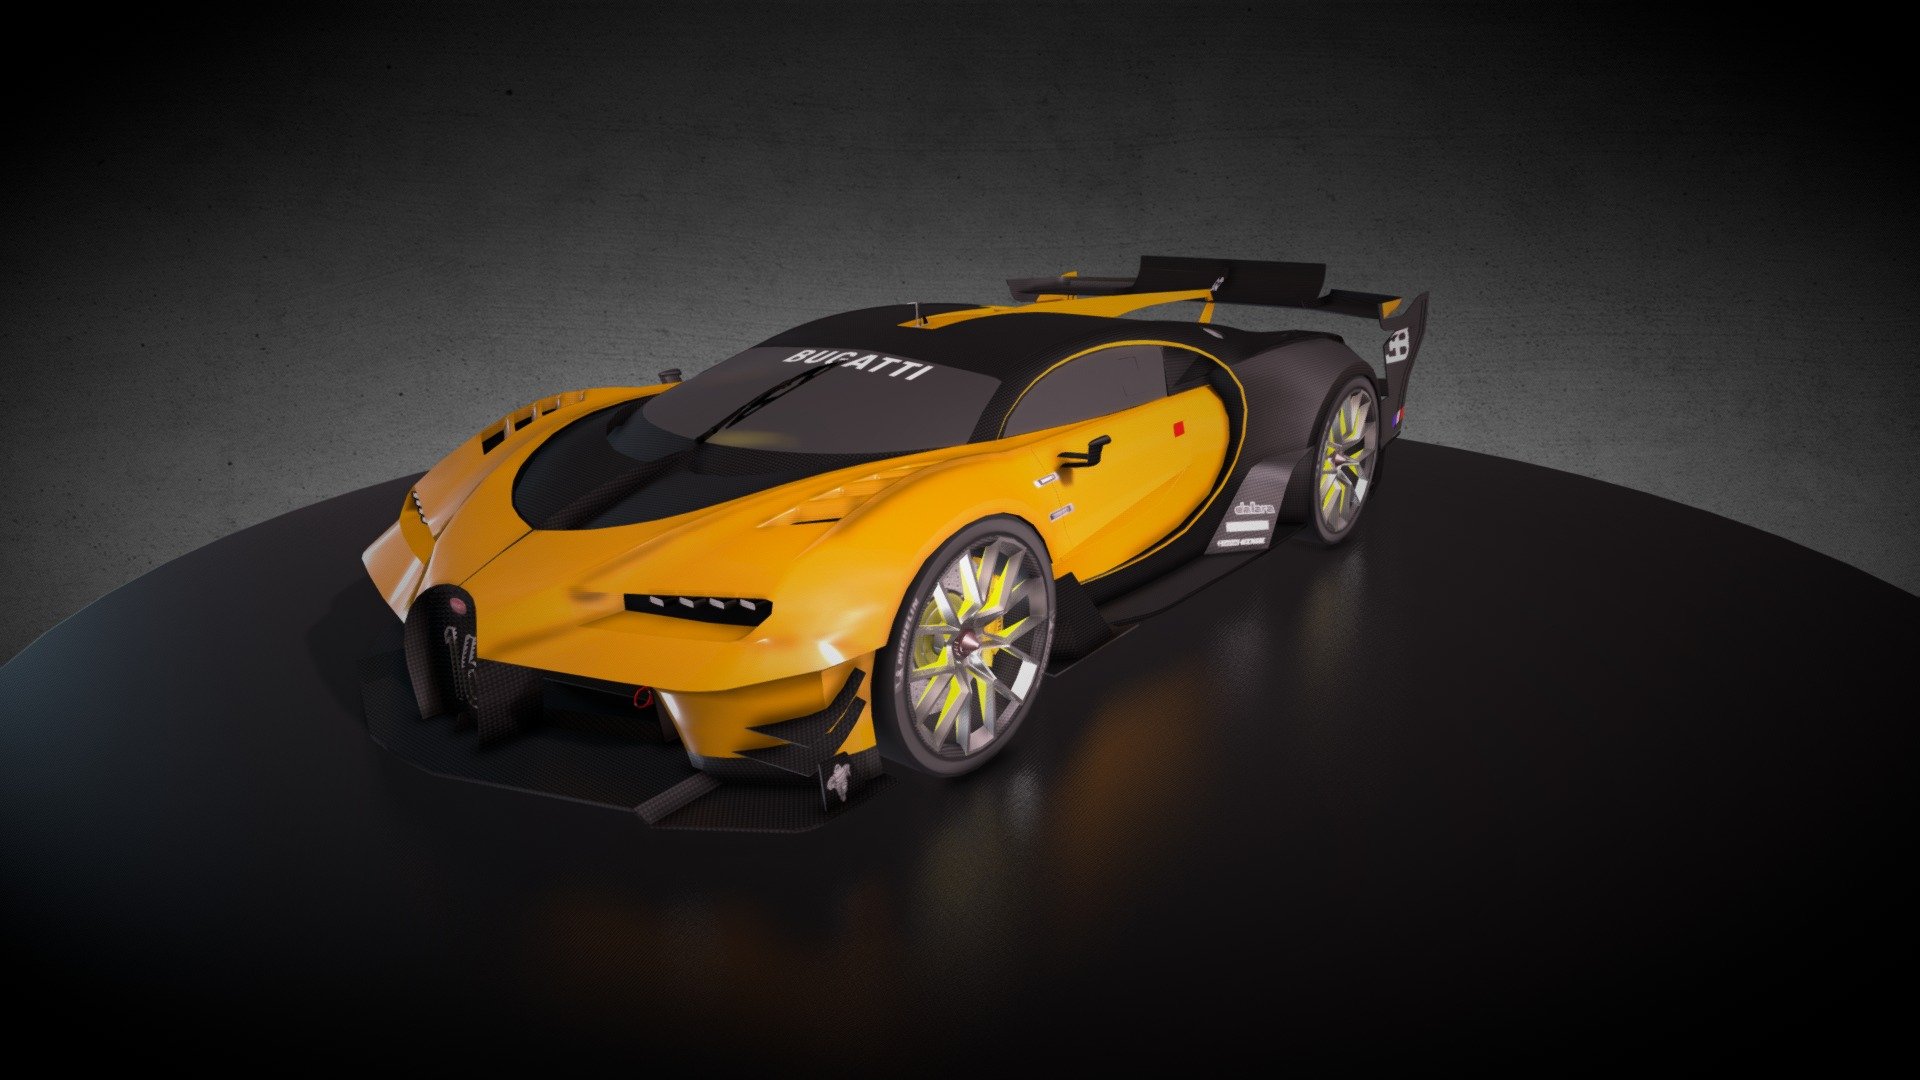 This model can be found on the assetstore by entering the query “game car”
The Bugatti Vision Gran Turismo is a single-seater concept car developed by Bugatti and was manufactured in Molsheim, Alsace, France. The car was unveiled at the 2015 Frankfurt Motor Show, a month after its teaser trailer was released, which was titled #imaginEBugatti.[1] It was built under the Vision Gran Turismo project, and with its looks, influenced the Bugatti Chiron's design language. The color scheme of the car is based on the 1937 Le Mans-winning Bugatti Type 57G Tank racer 3d model